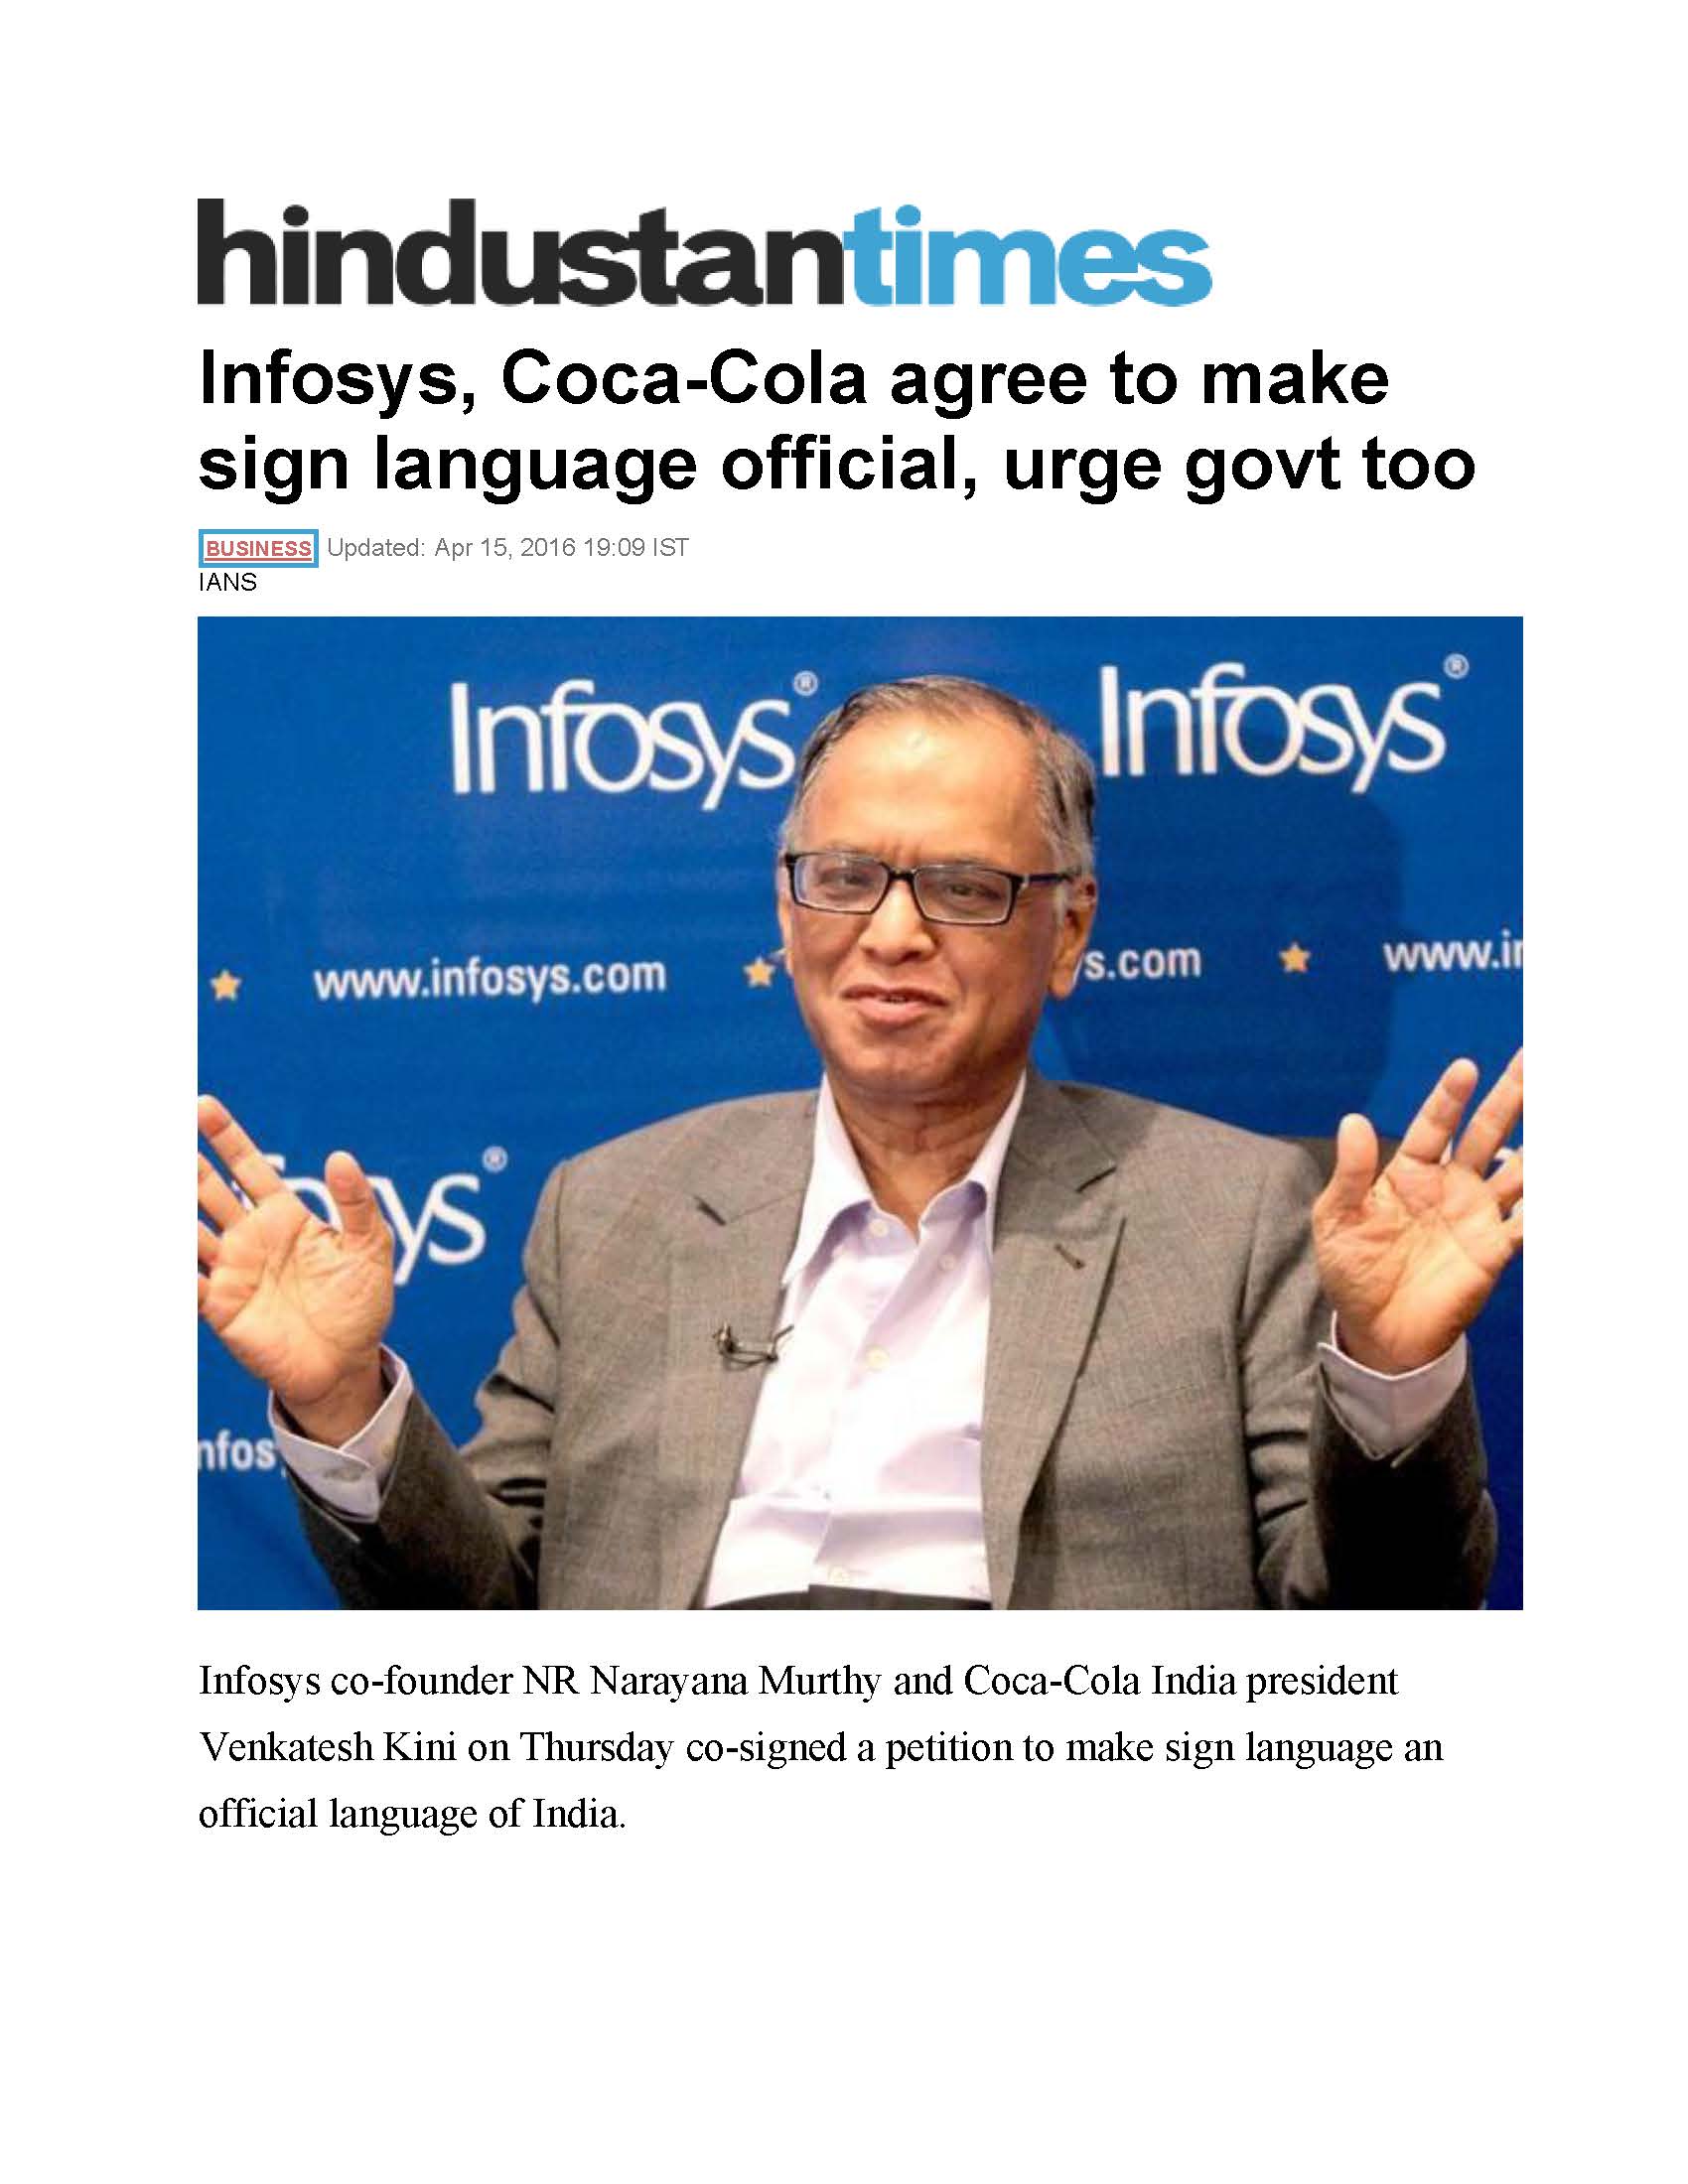 Infosys, Coca-Cola agree to make sign language official, urge Govt too